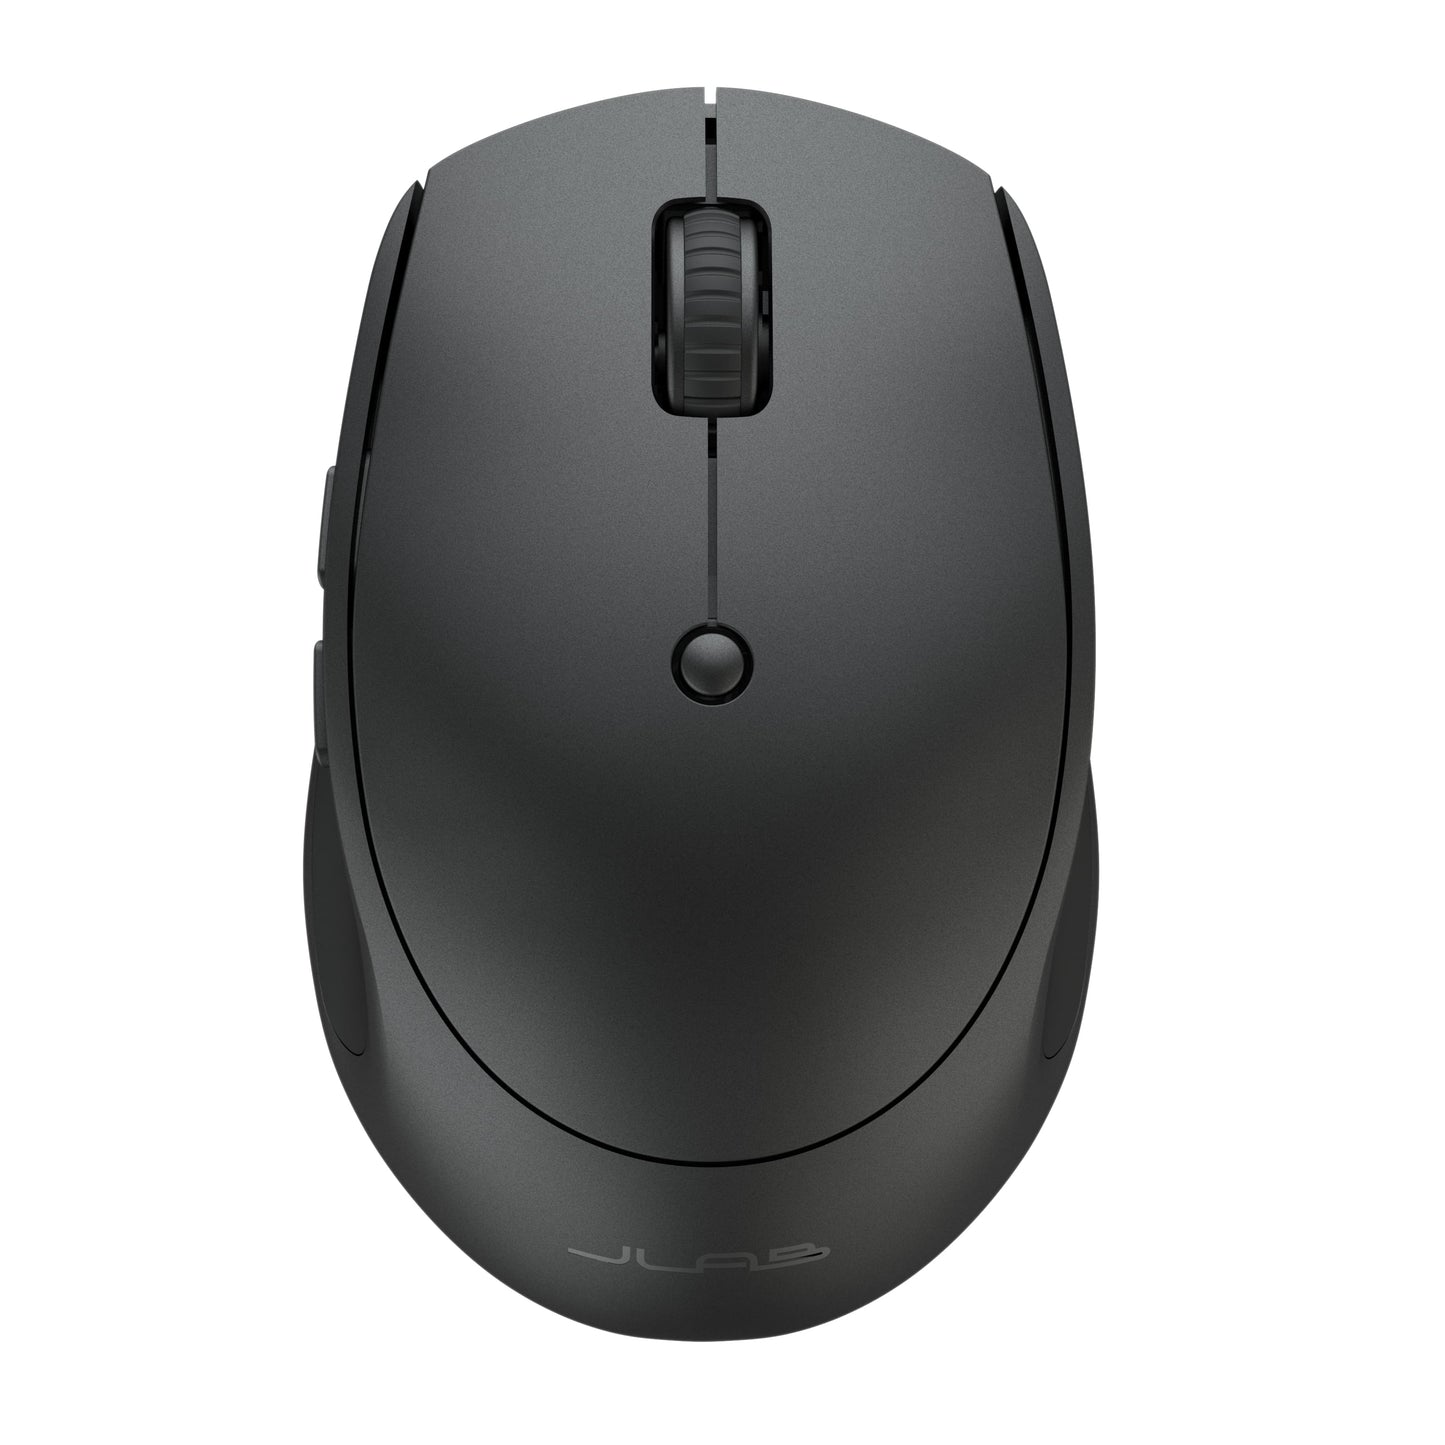 GO Wireless Mouse Rechargeable|